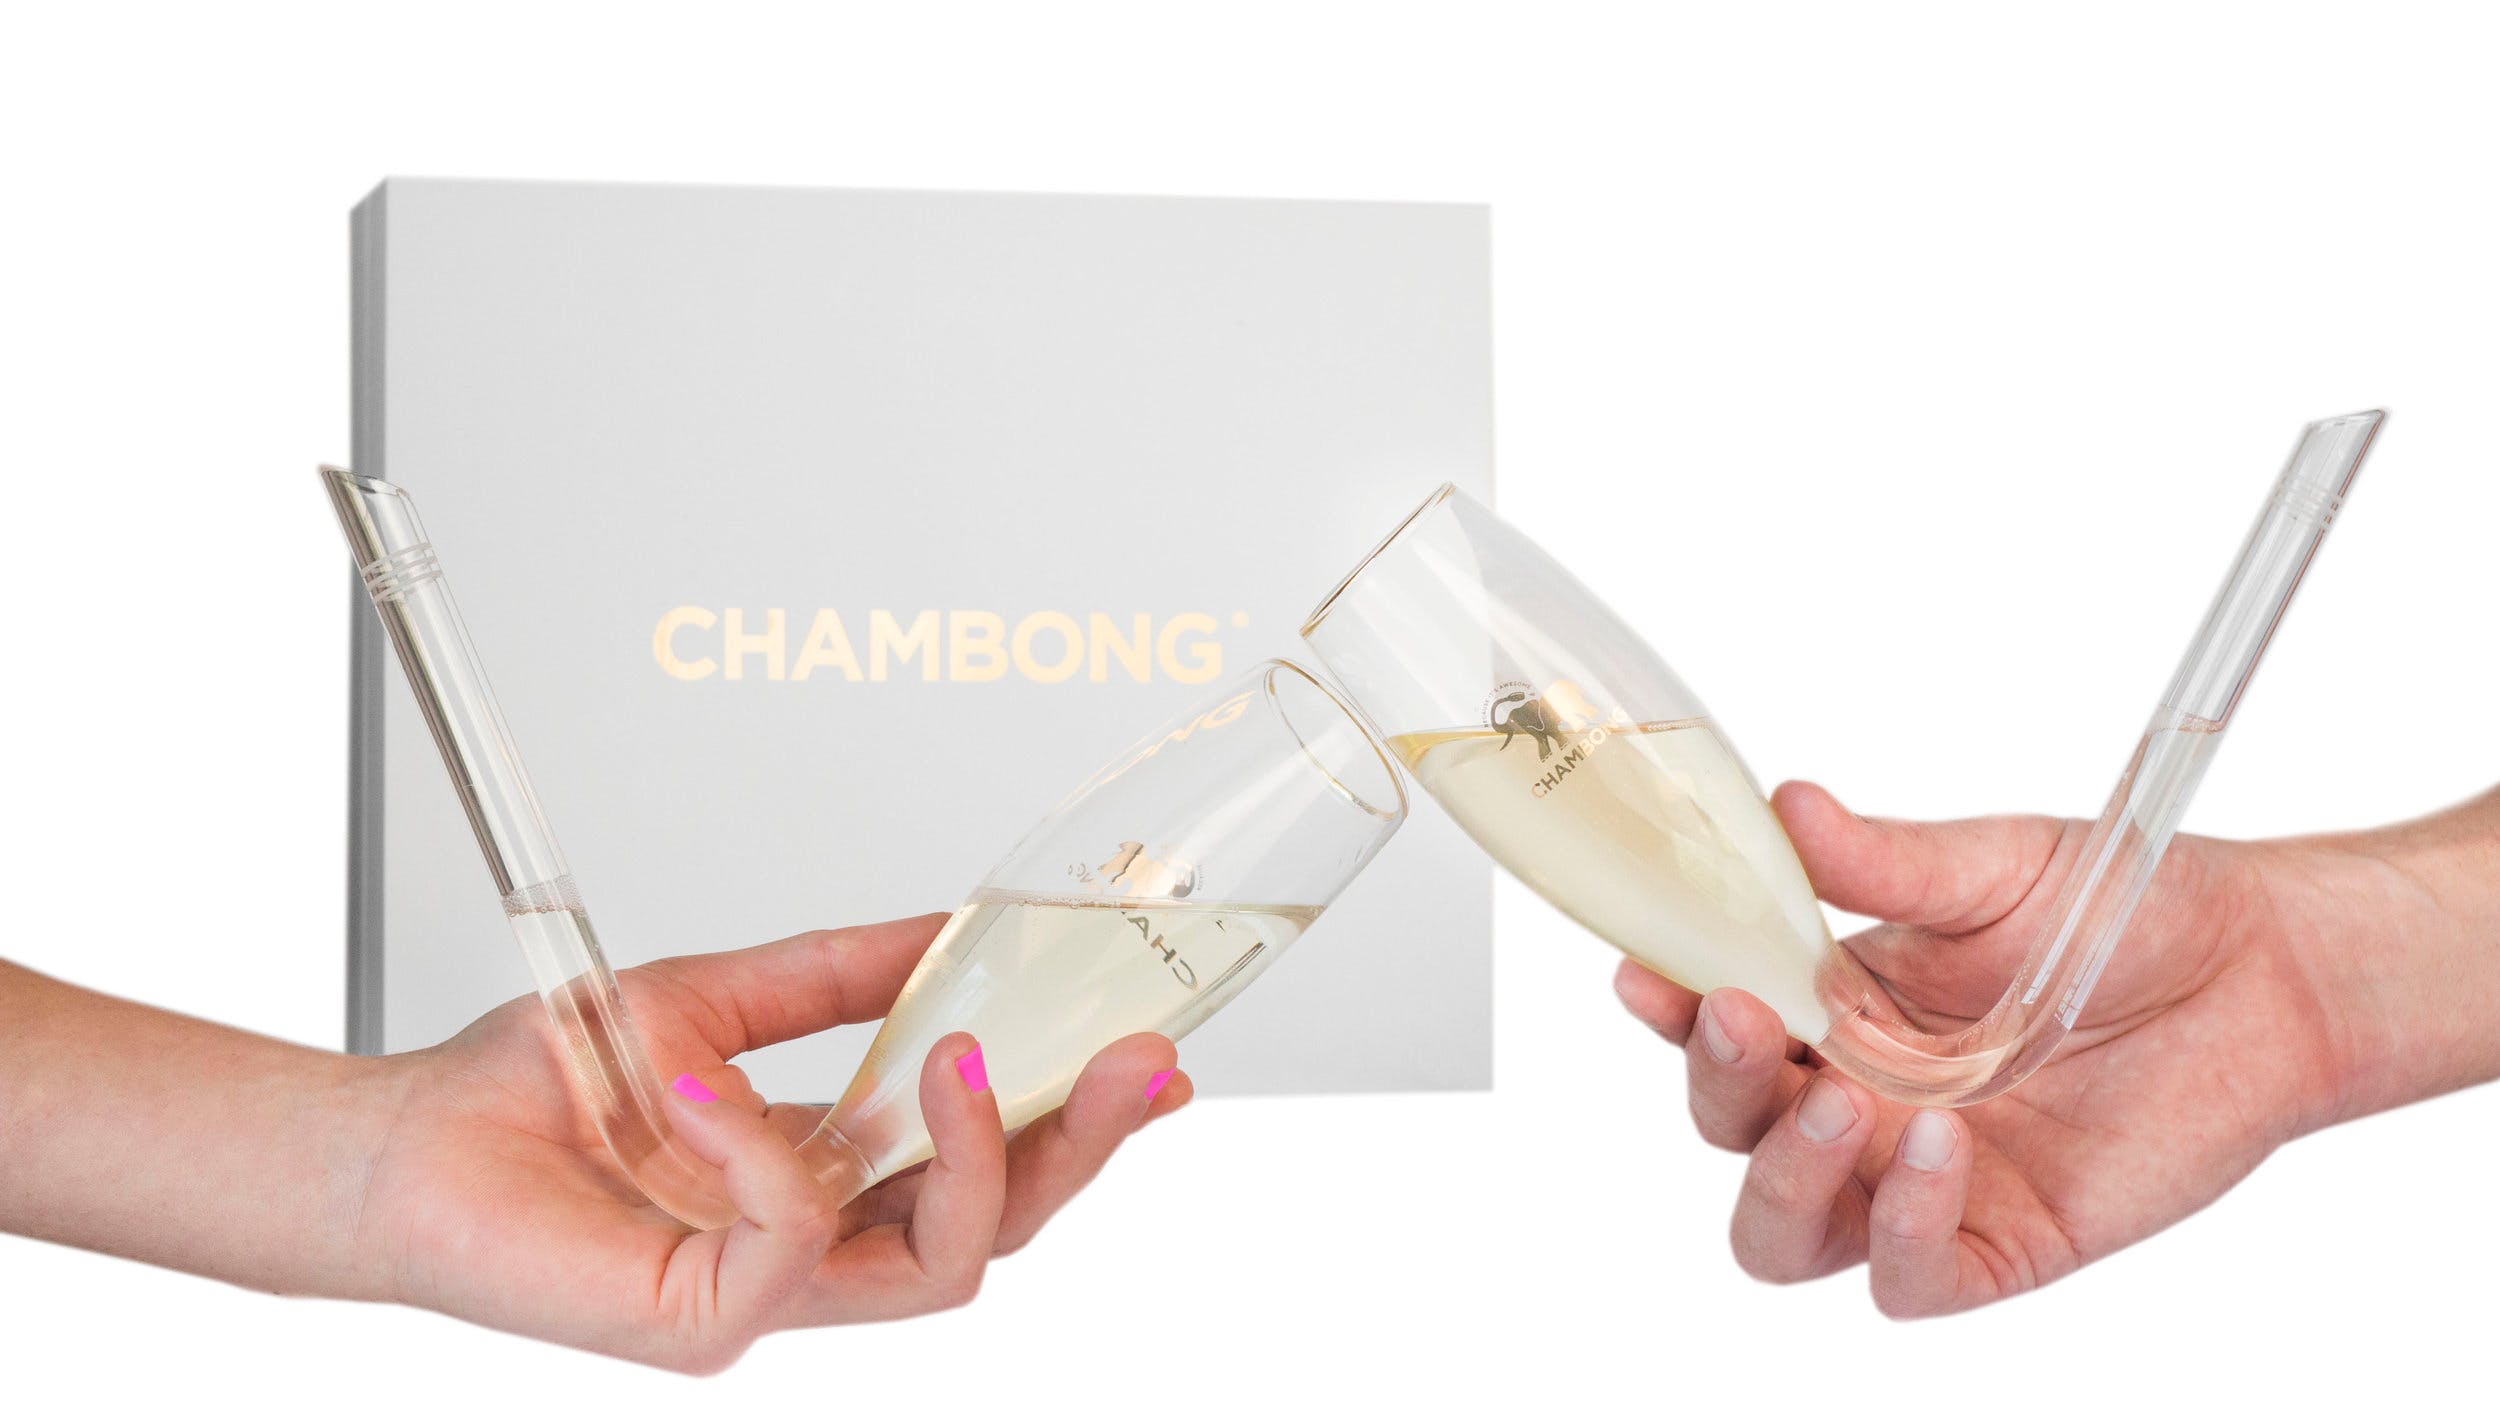 The Chambong - Champagne Beer Bong media 2